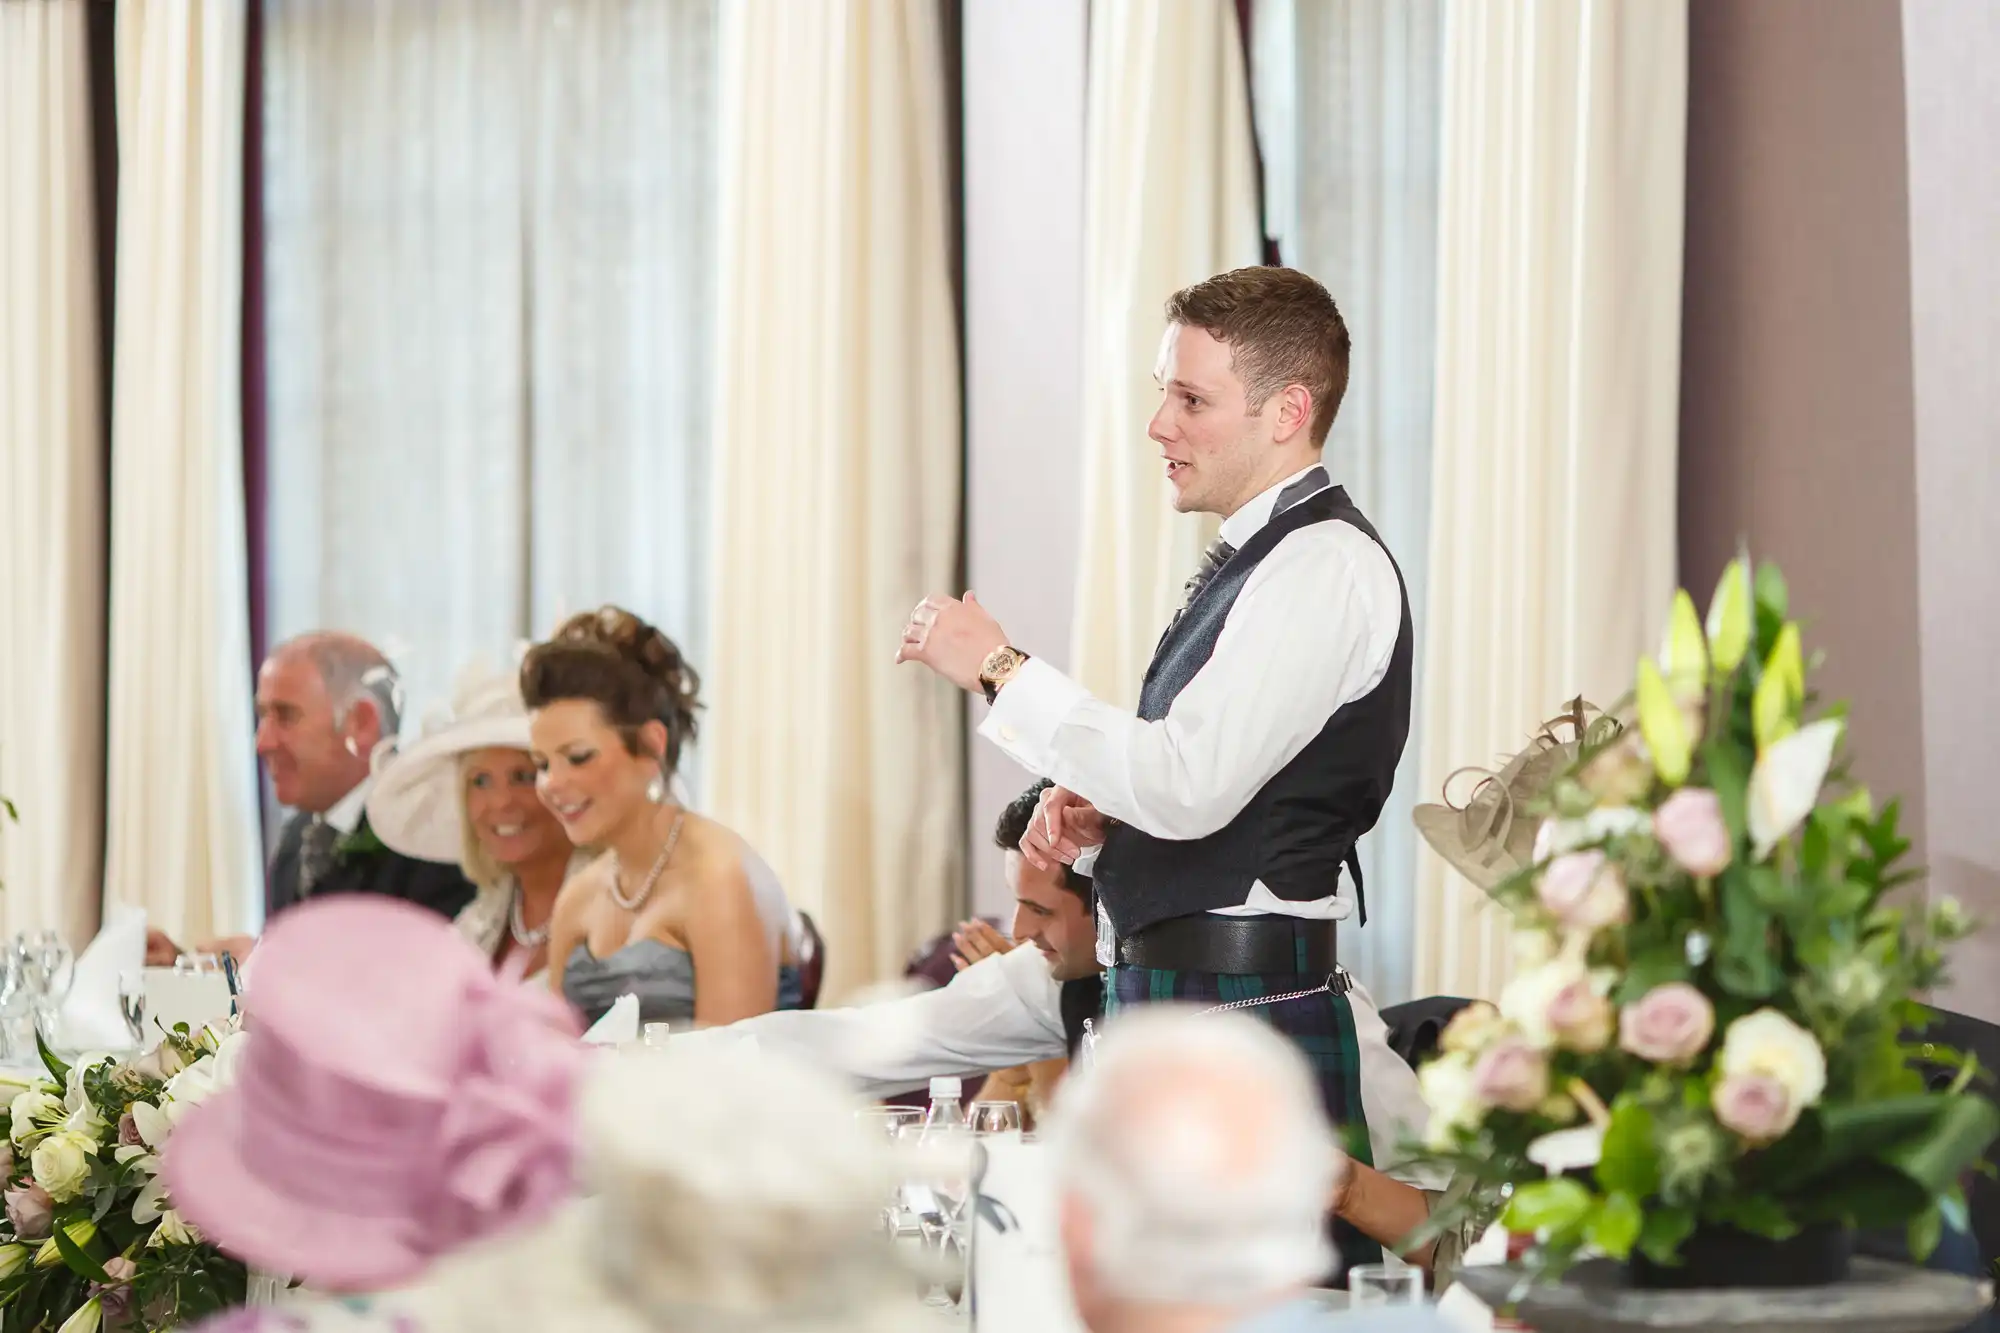 A man giving a speech at a wedding reception, gesturing with his right hand, with guests seated around tables, listening and smiling.